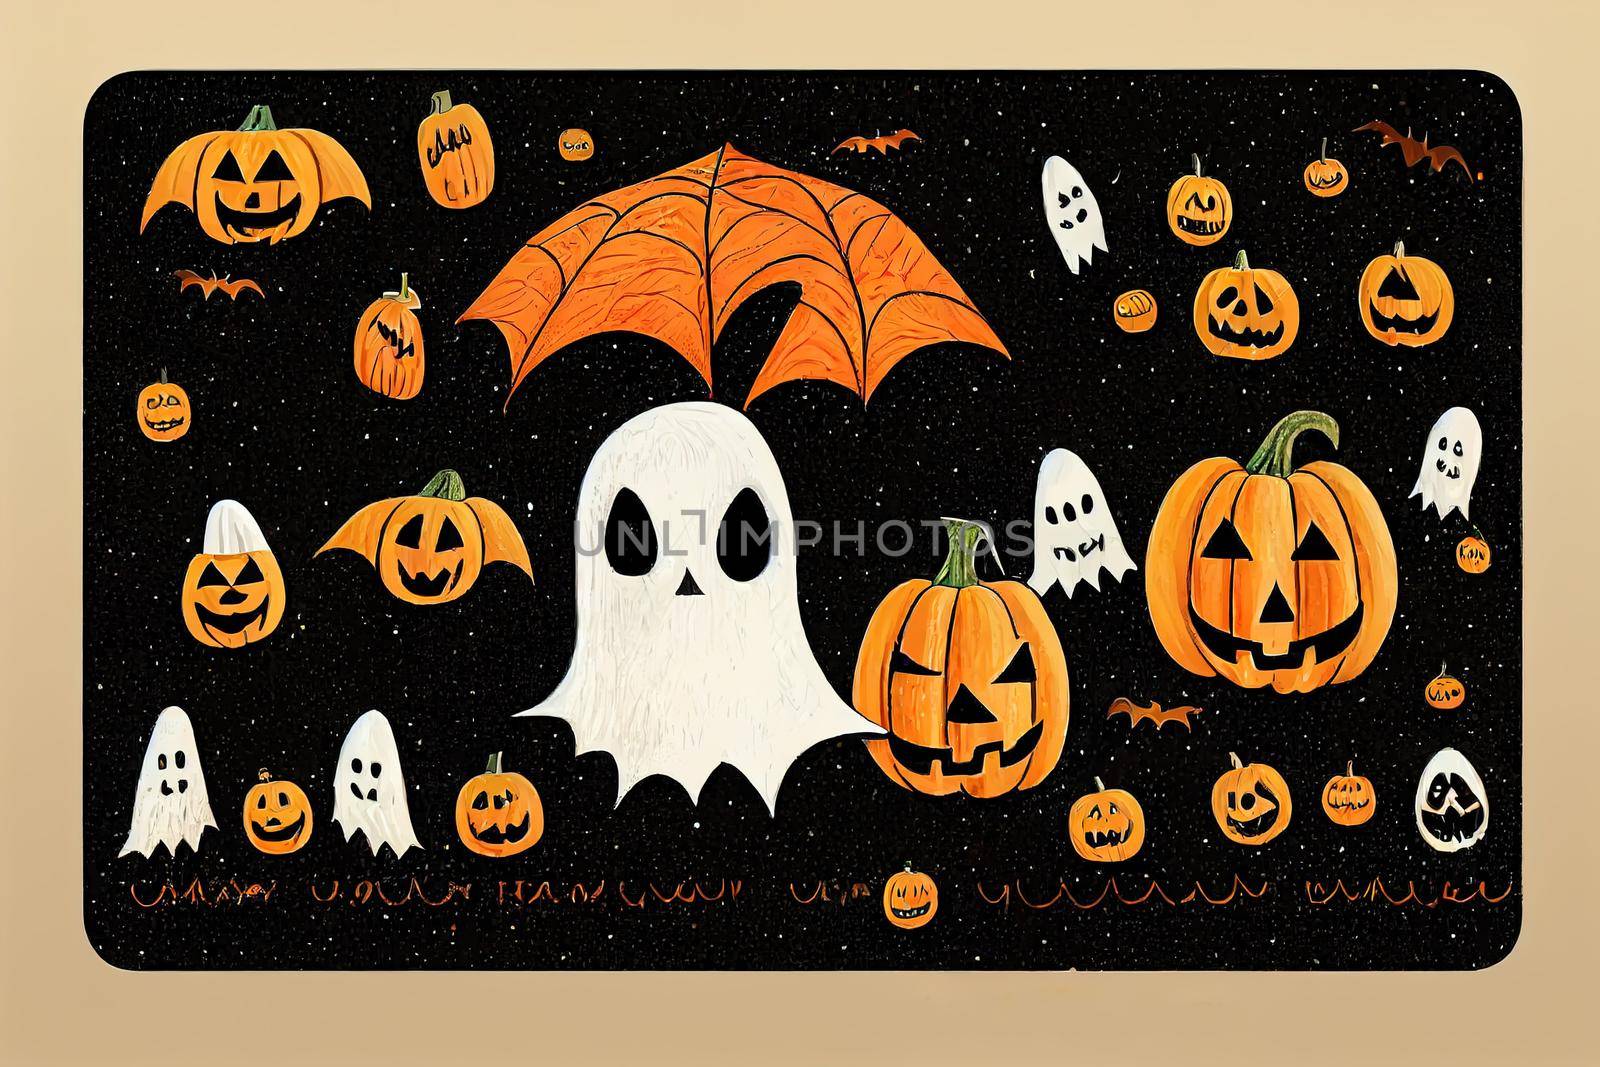 Cute Hand Drawn Halloween Cards and Pattern, Little White Ghost on a Black Background, Happy Halloween, Trick or Treat, Sweet Little Pumpkins and White Funny Skulls, Gravestone with Boo inscription v1